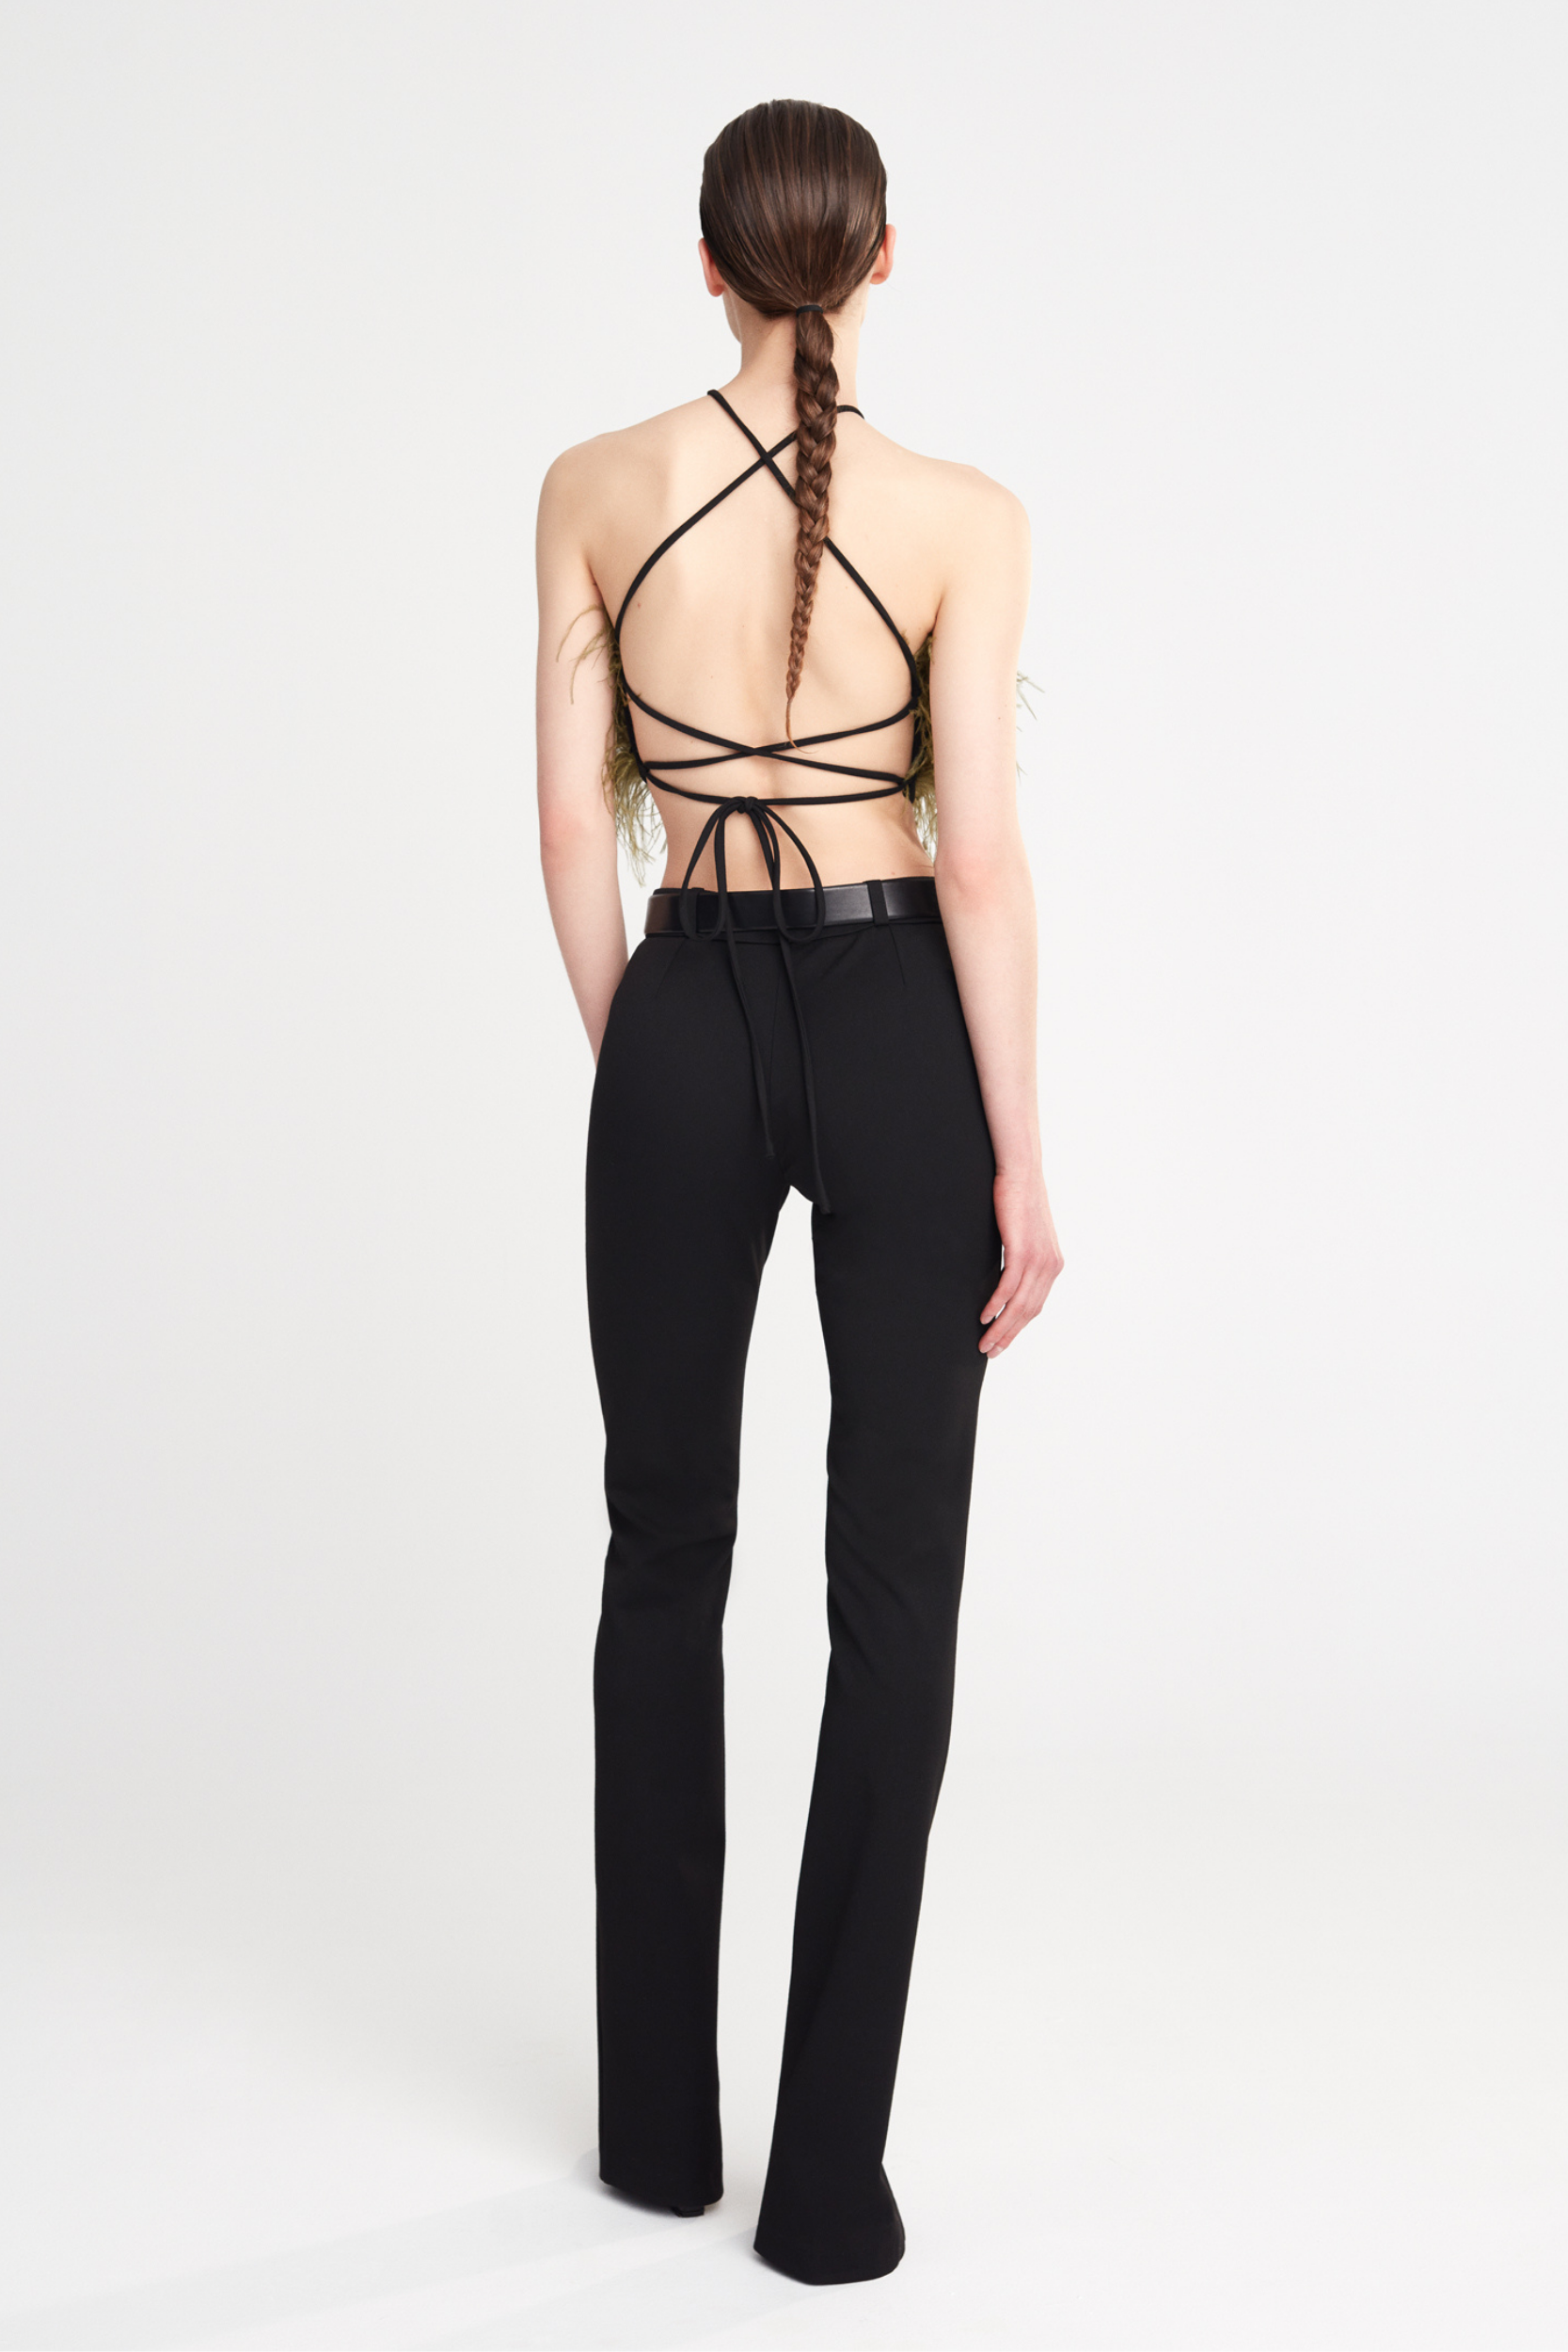 TORI - FEATHER CROP TOP WITH OPEN BACK